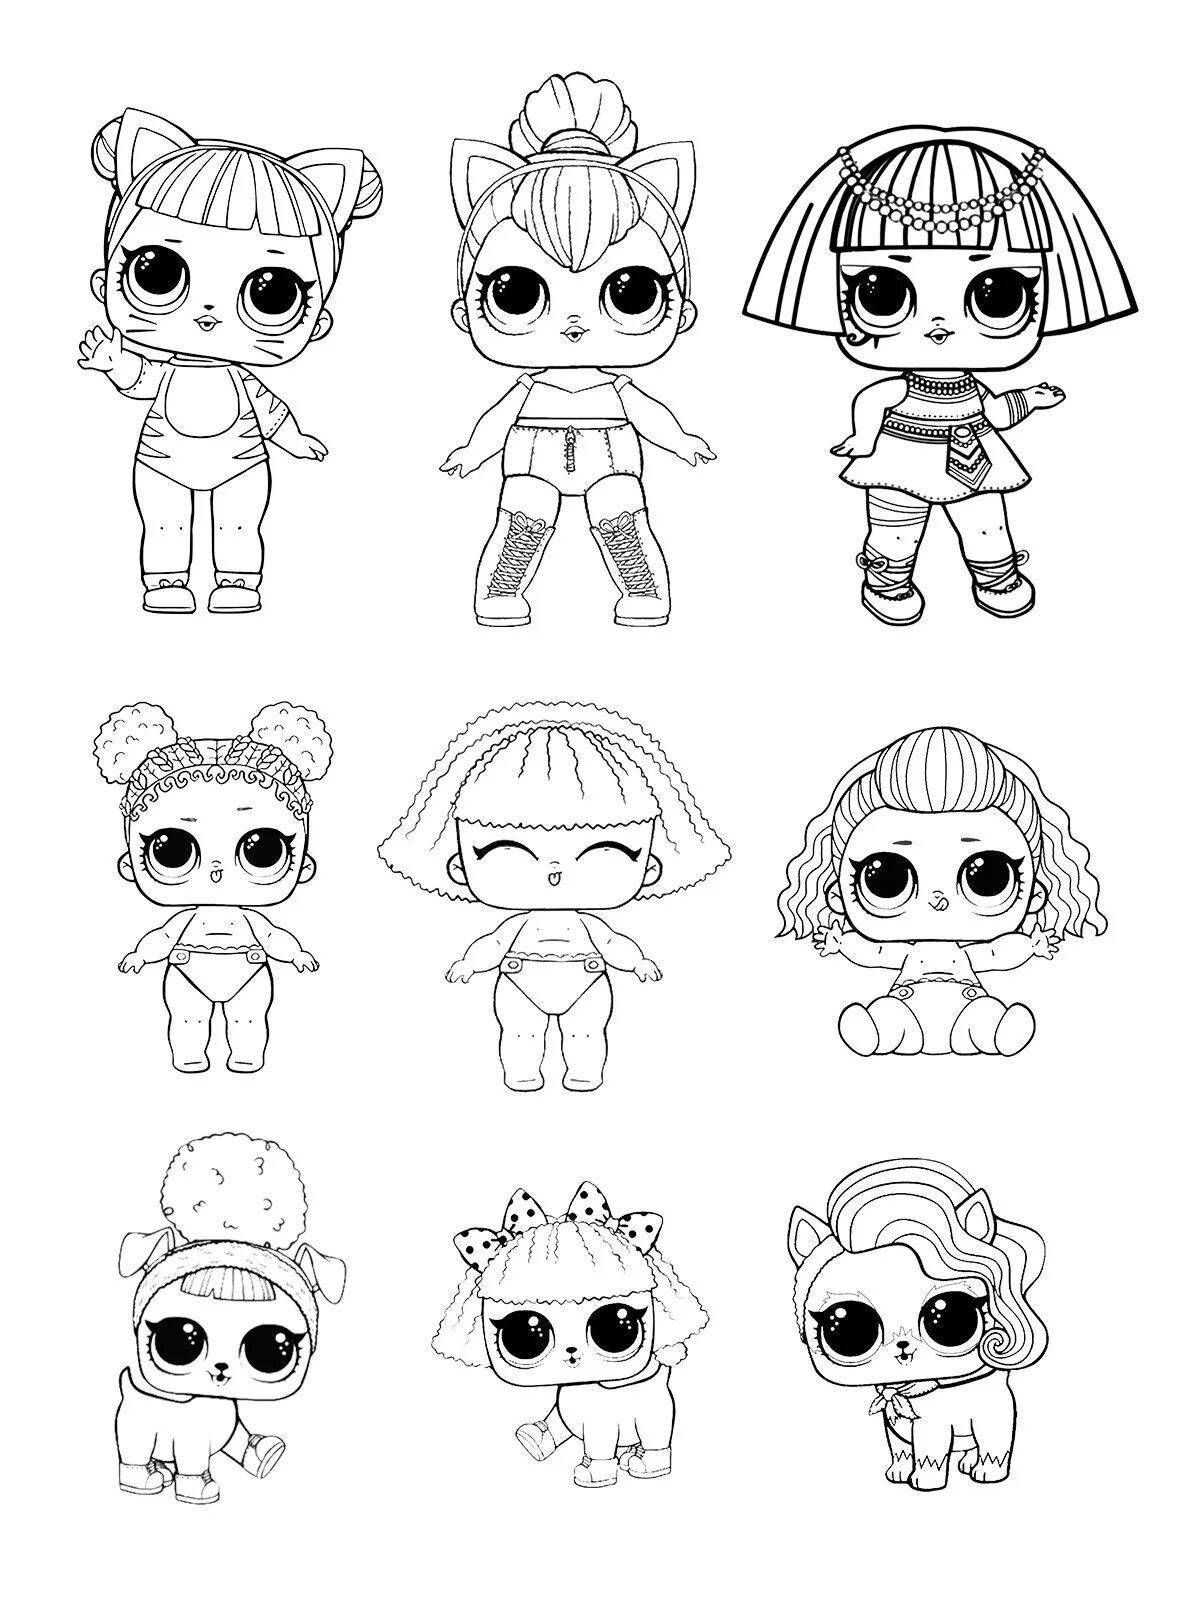 Playful lol doll coloring